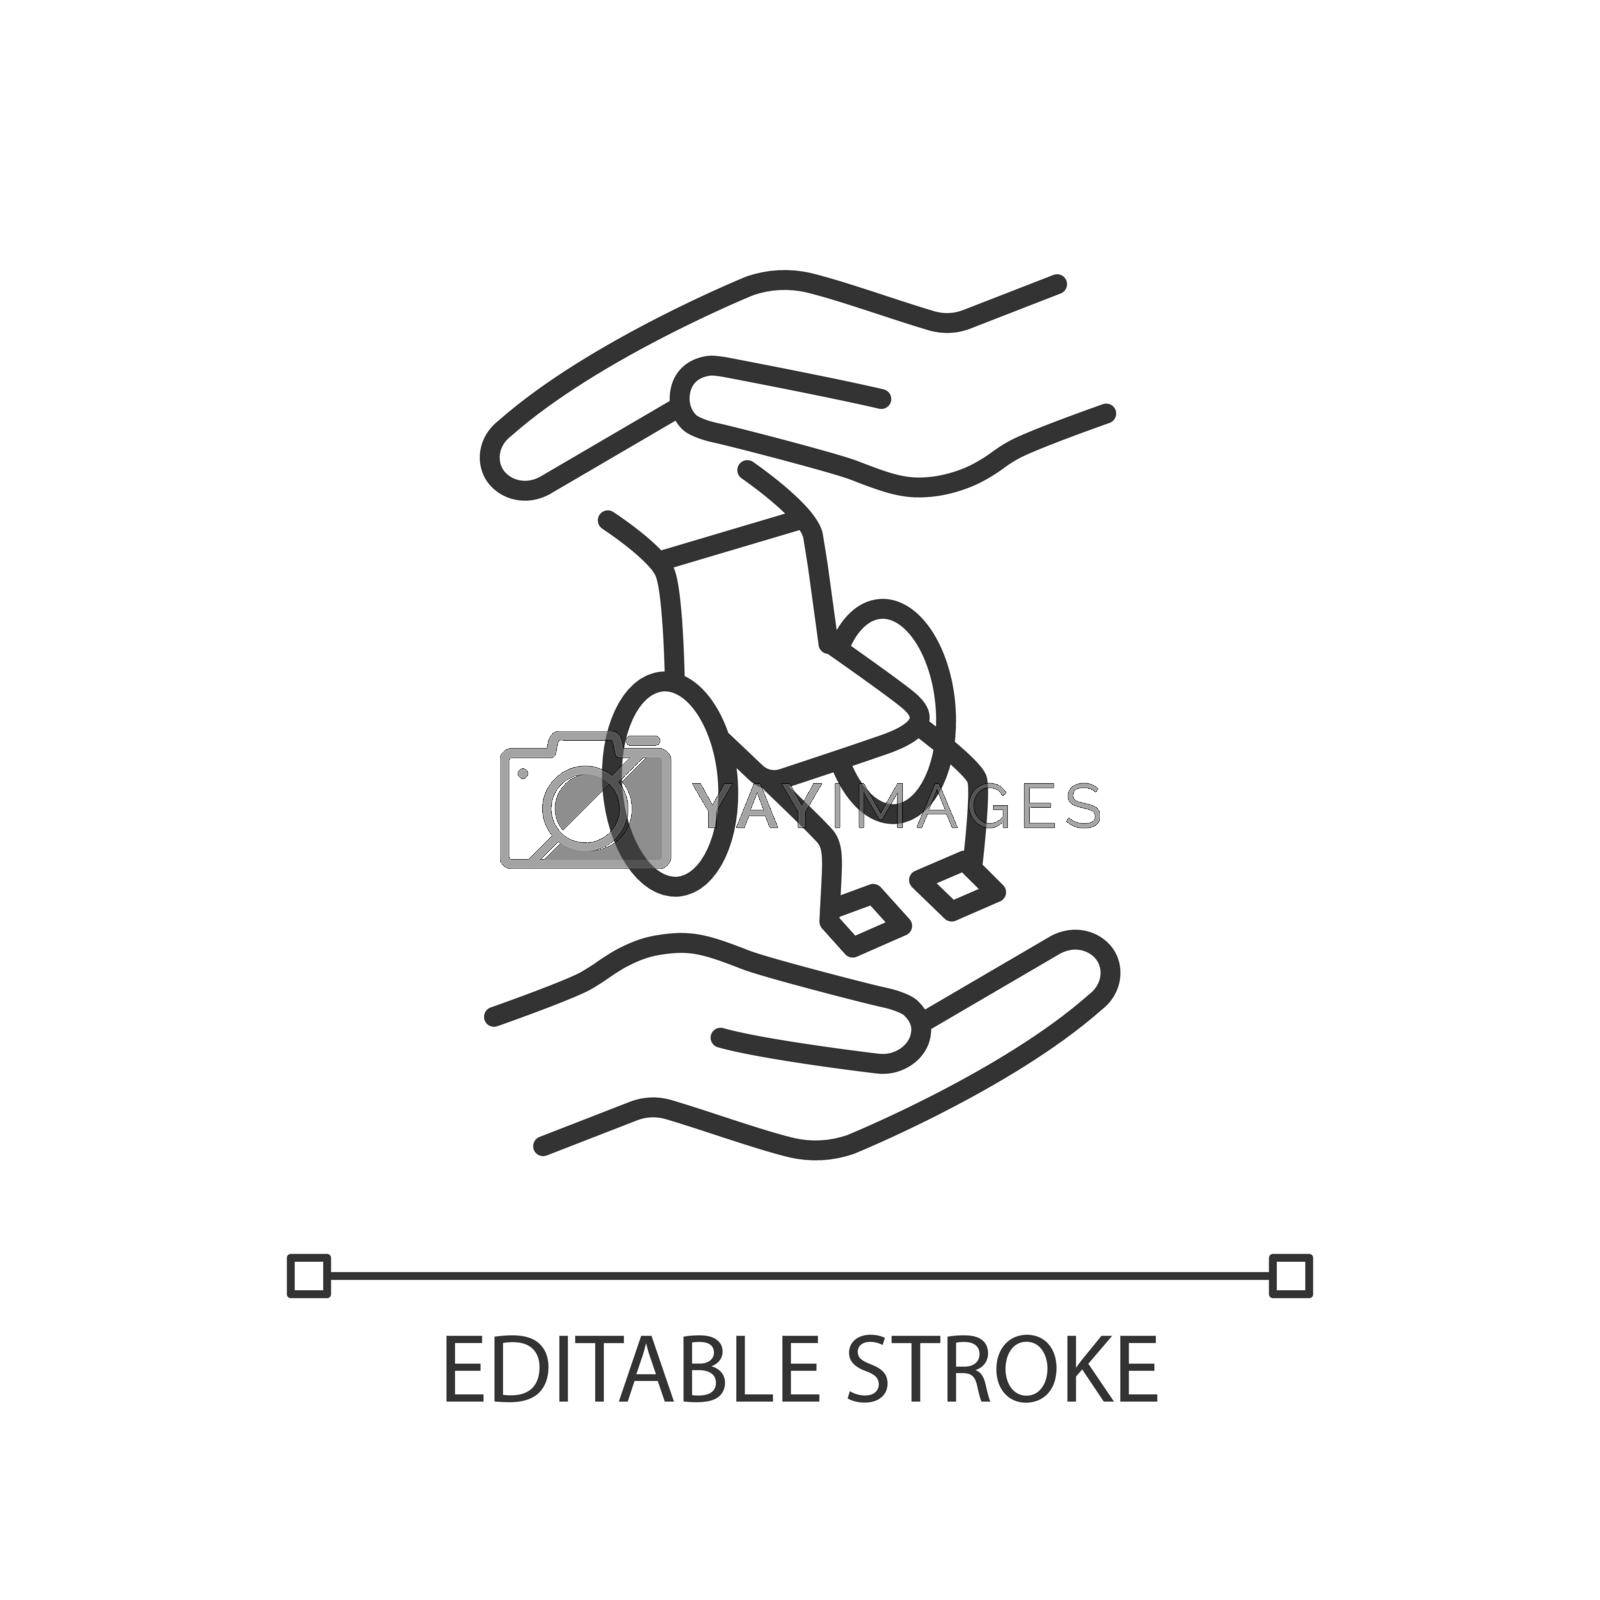 Support people with disabilities linear icon. Equal opportunities for special needs children. Thin line illustration. Contour symbol. Vector outline drawing. Editable stroke. Arial font used